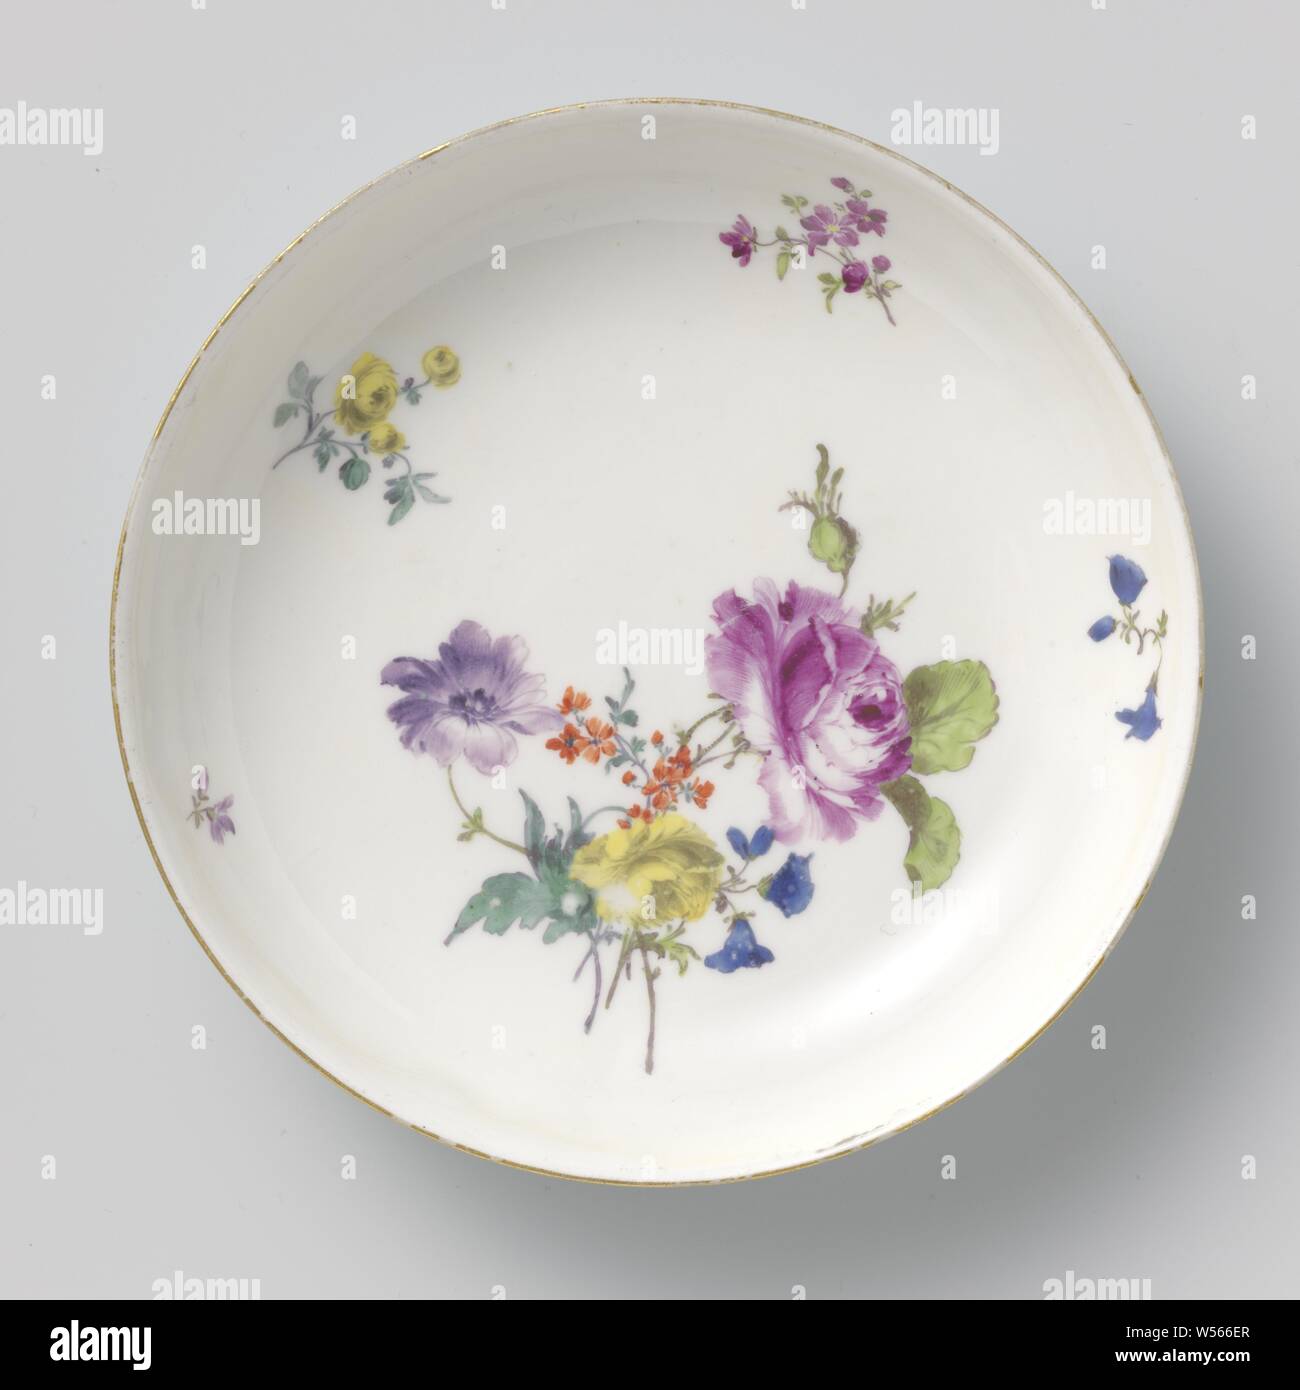 Saucer, multicolored painted with flower bouquets and scatter flowers, Saucer of painted porcelain. The round dish is painted with multicolored flower bouquets and the back is covered with a turquoise fond. The dish is marked., Meissener Porzellan Manufaktur, Meissen, c. 1750, porcelain (material), h 2.9 cm × d 13.5 cm Stock Photo